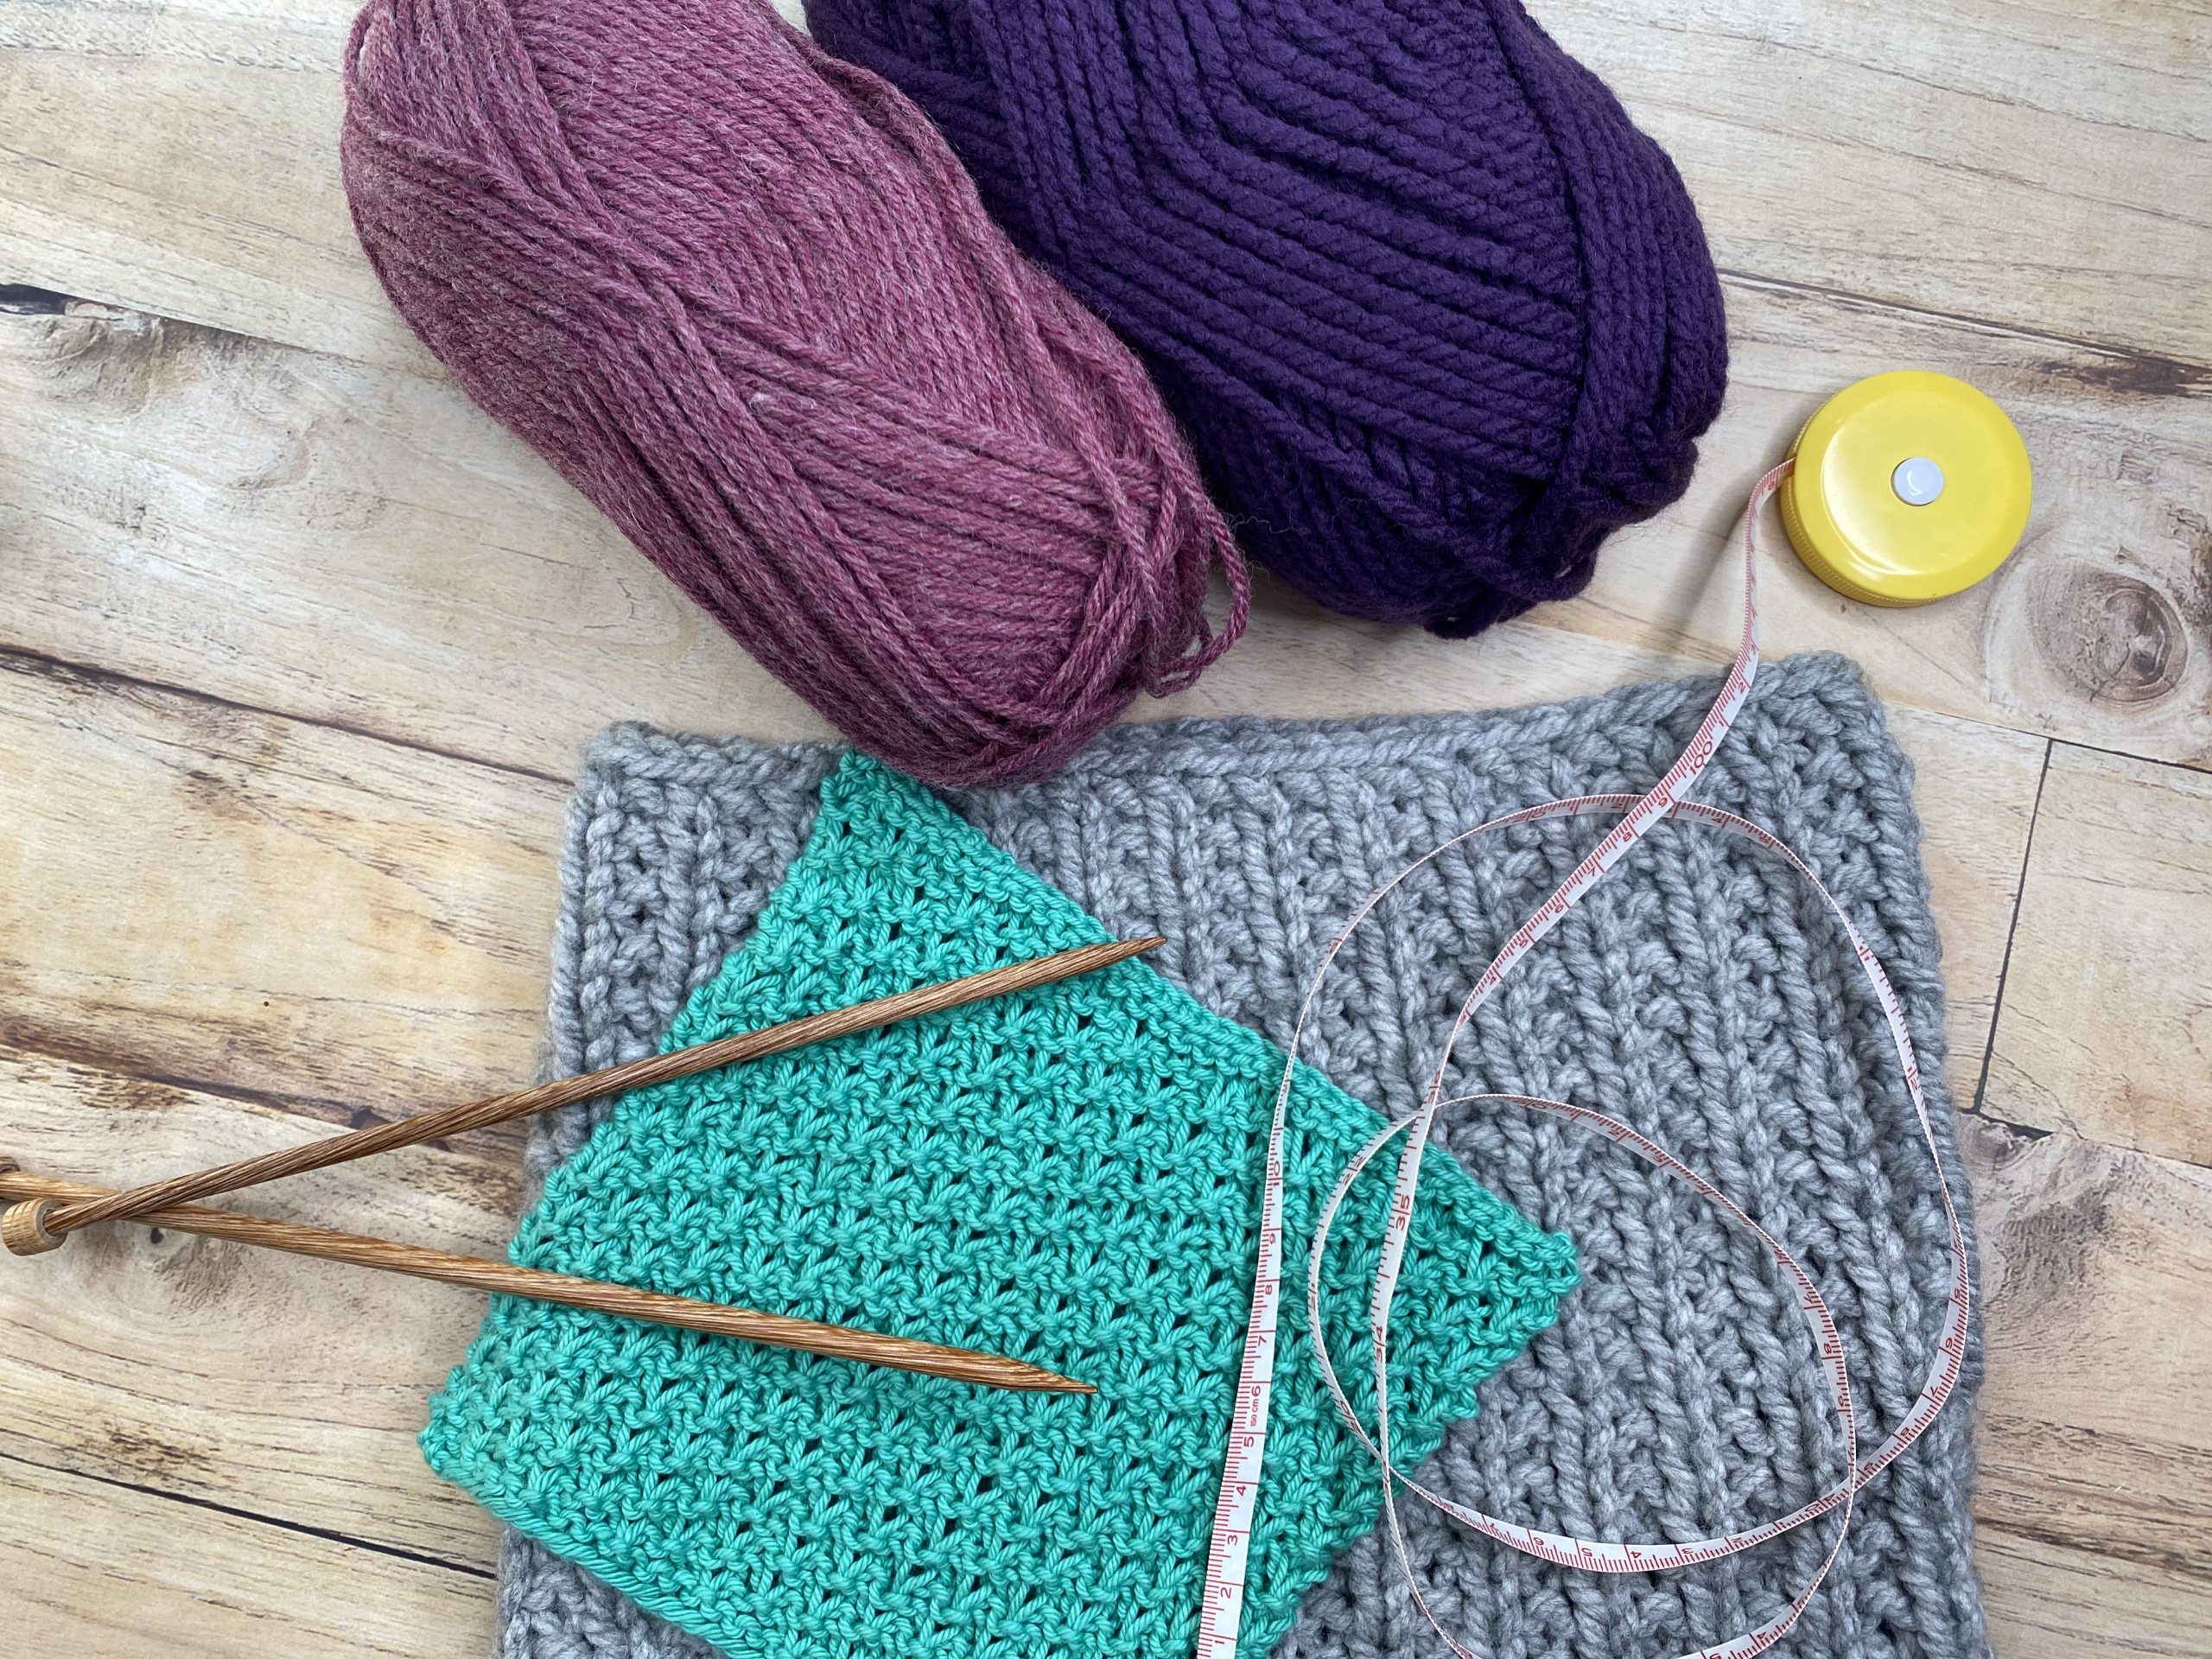 Why I Only Reach for a DPN When I'm Cable Knitting